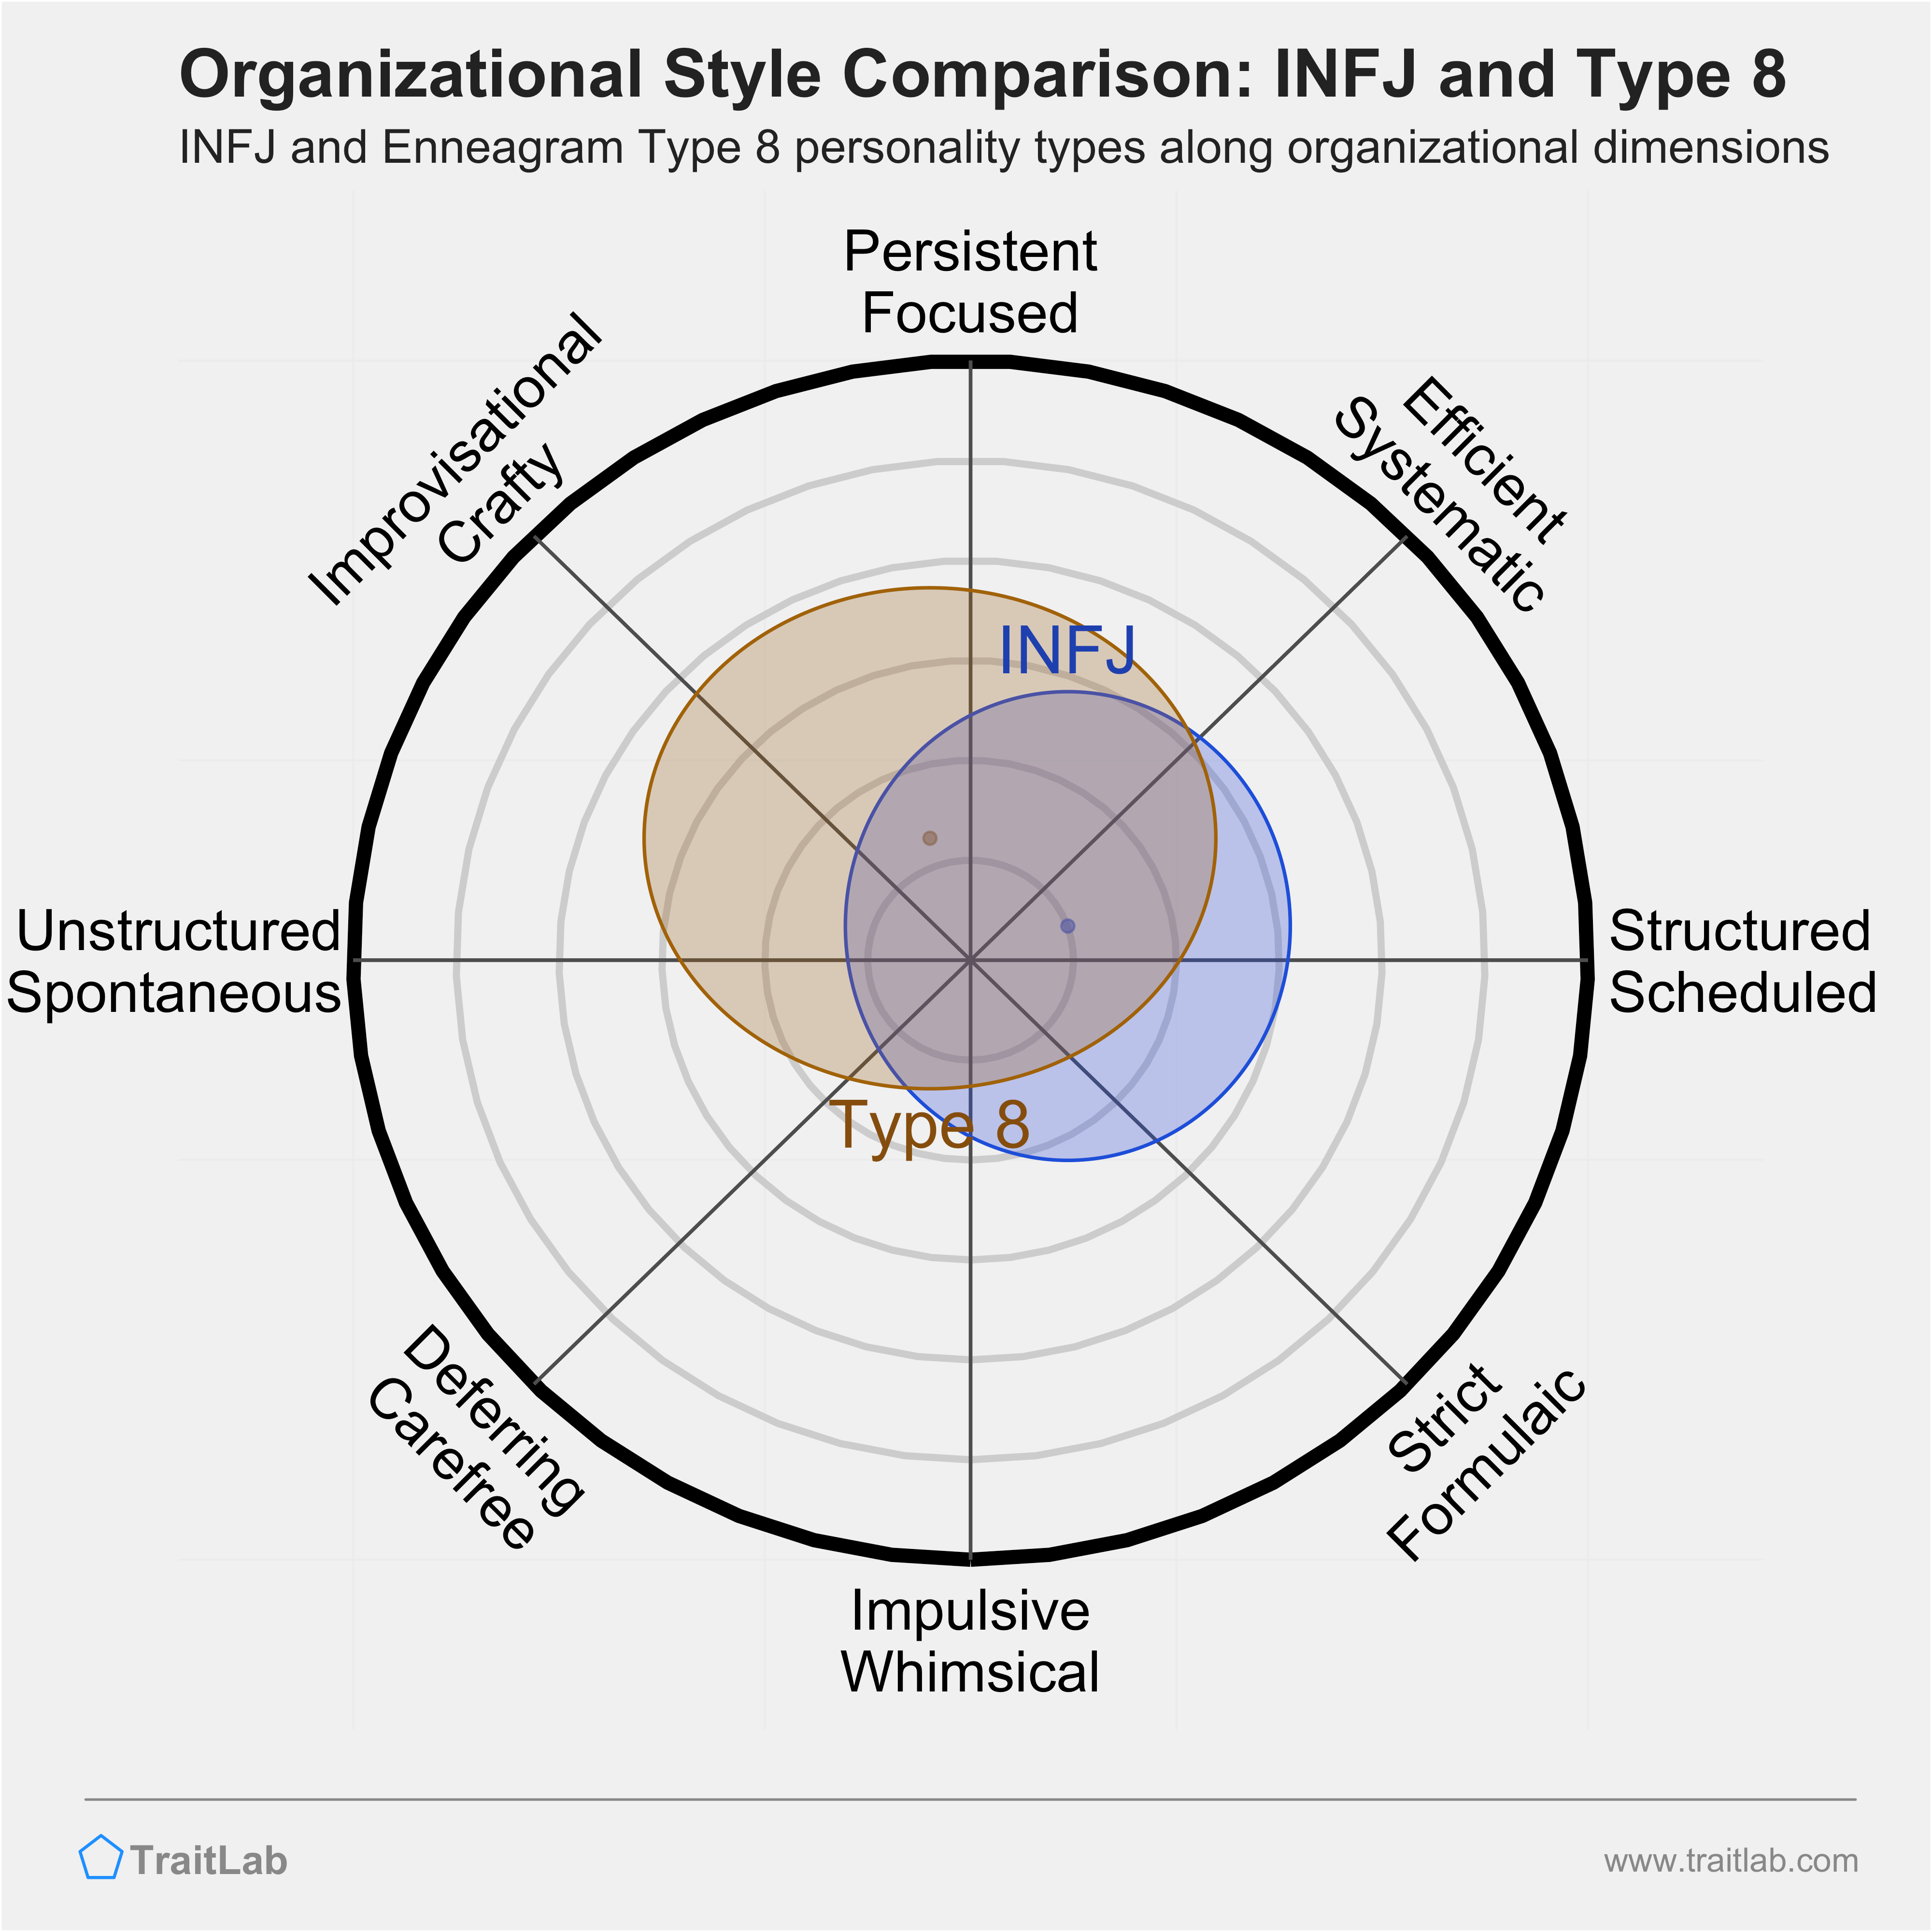 INFJ and Type 8 comparison across organizational dimensions